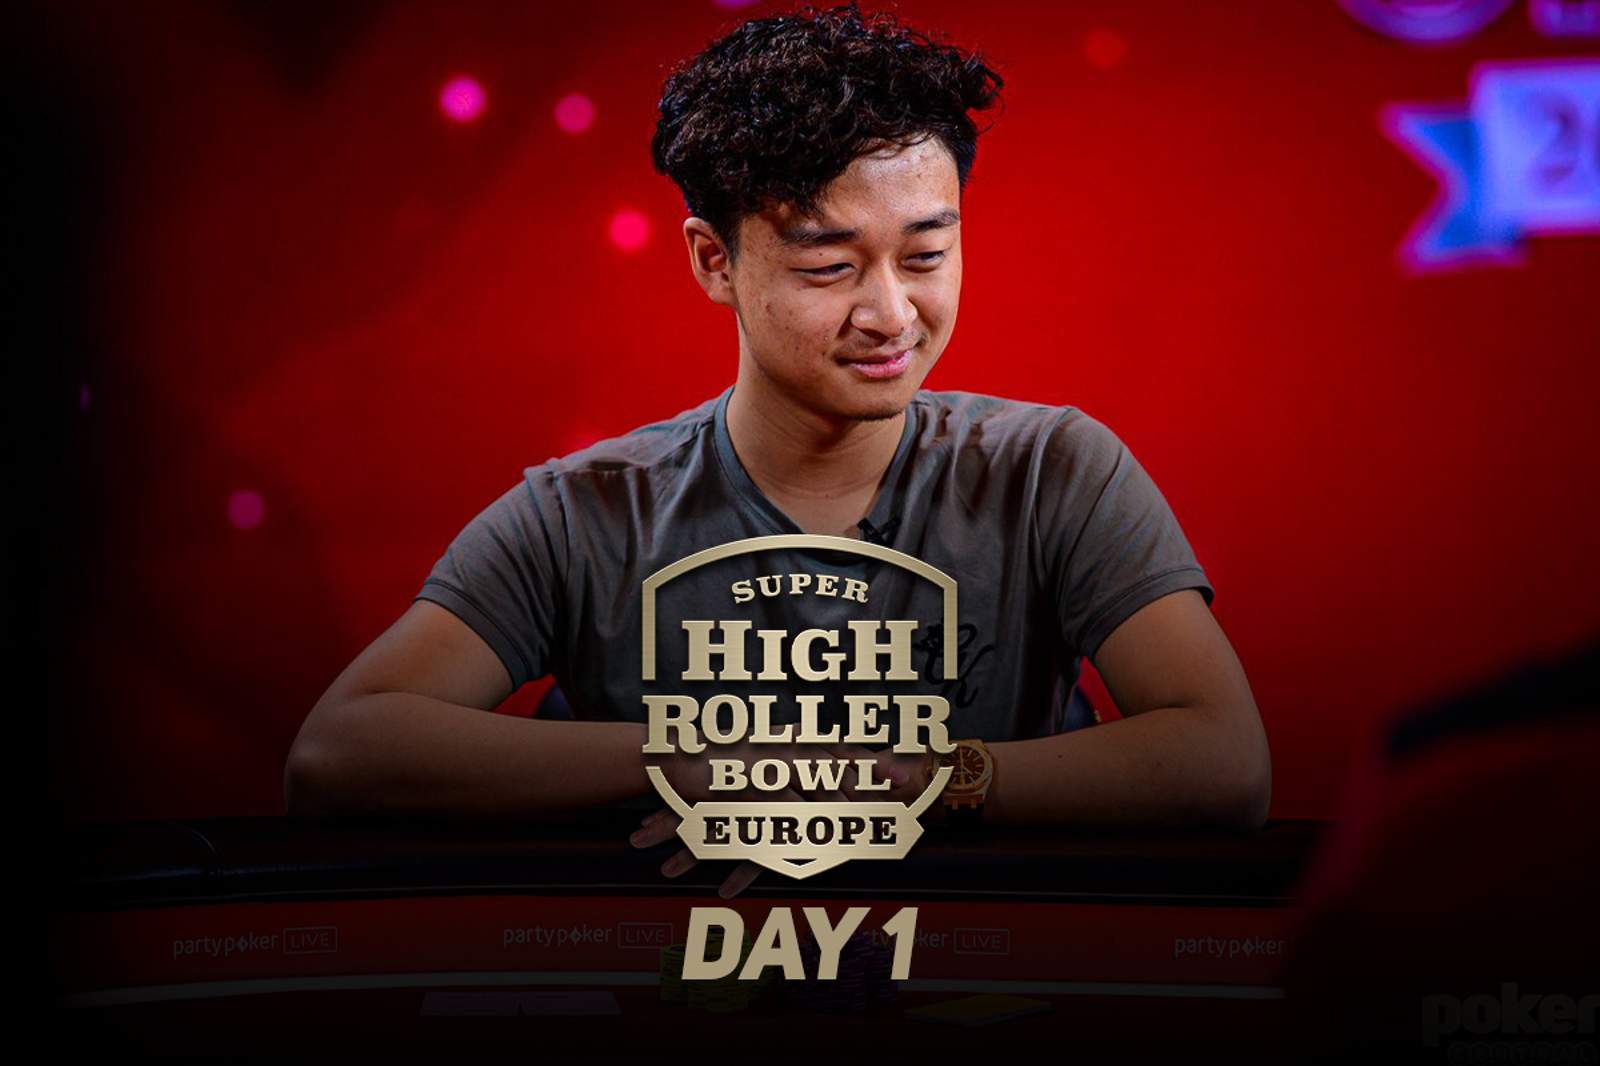 Super High Roller Bowl Europe Day 1 Concludes with Michael Zhang Leading 22 Players